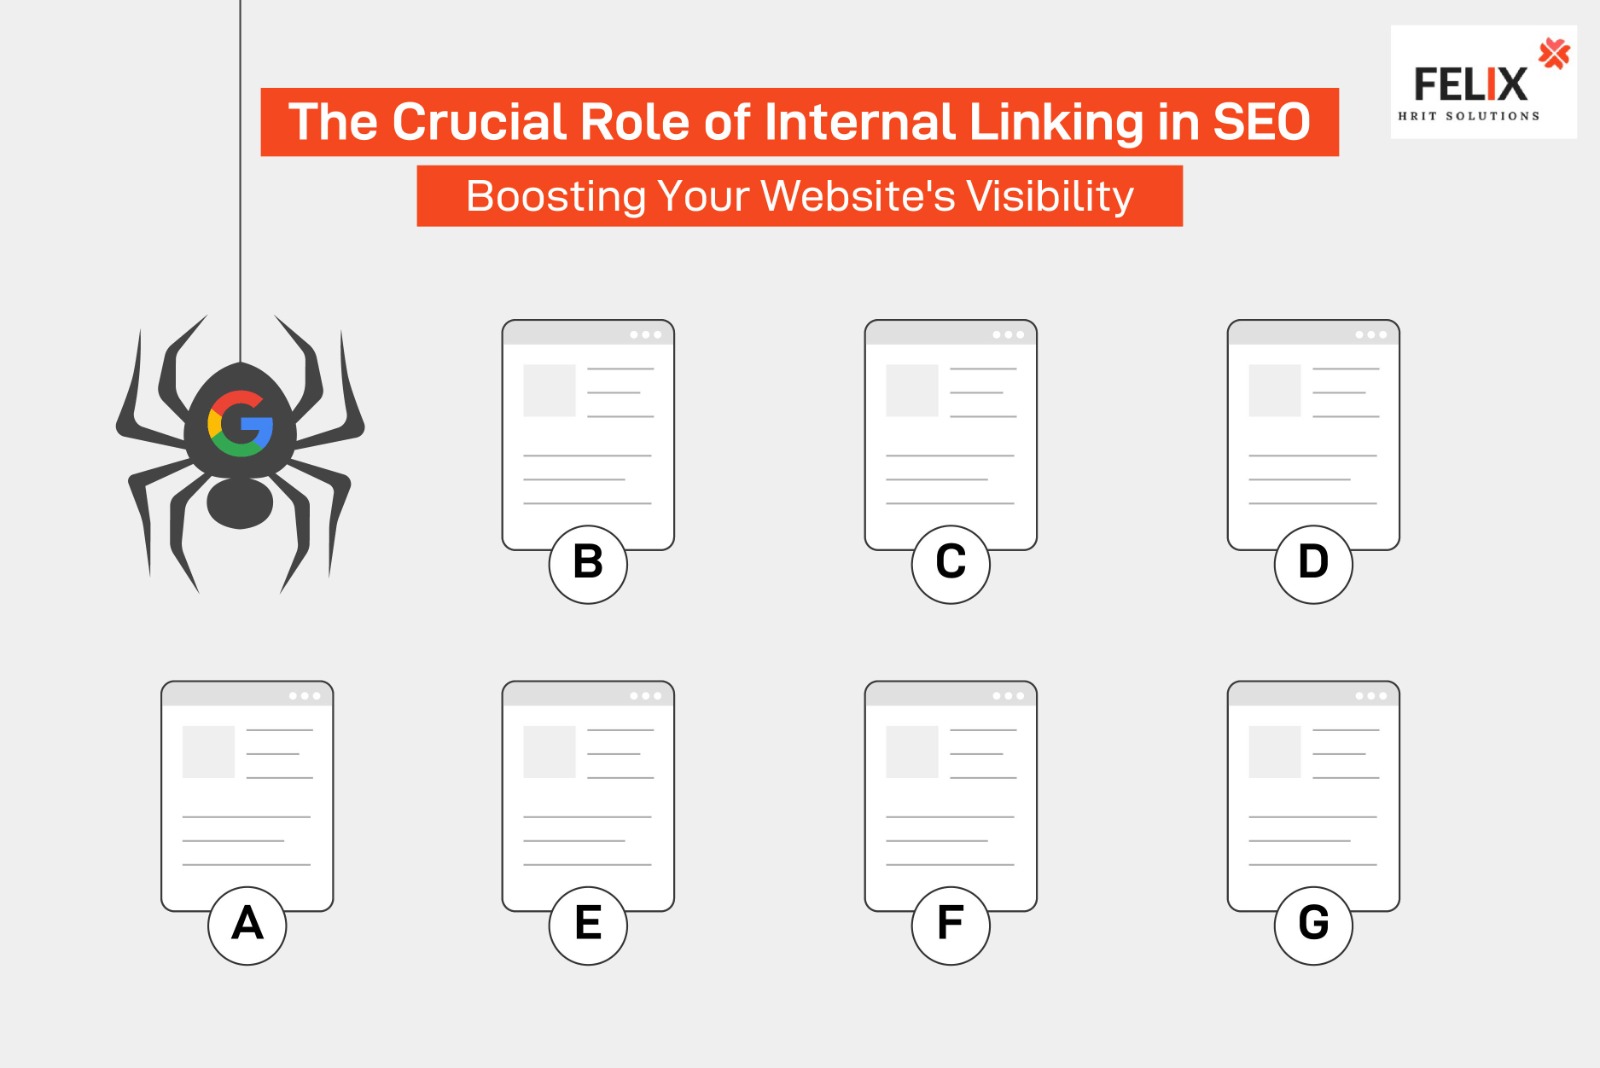 Mastering the role of Internal Linking for SEO: A Path to Enhanced Website Traffic